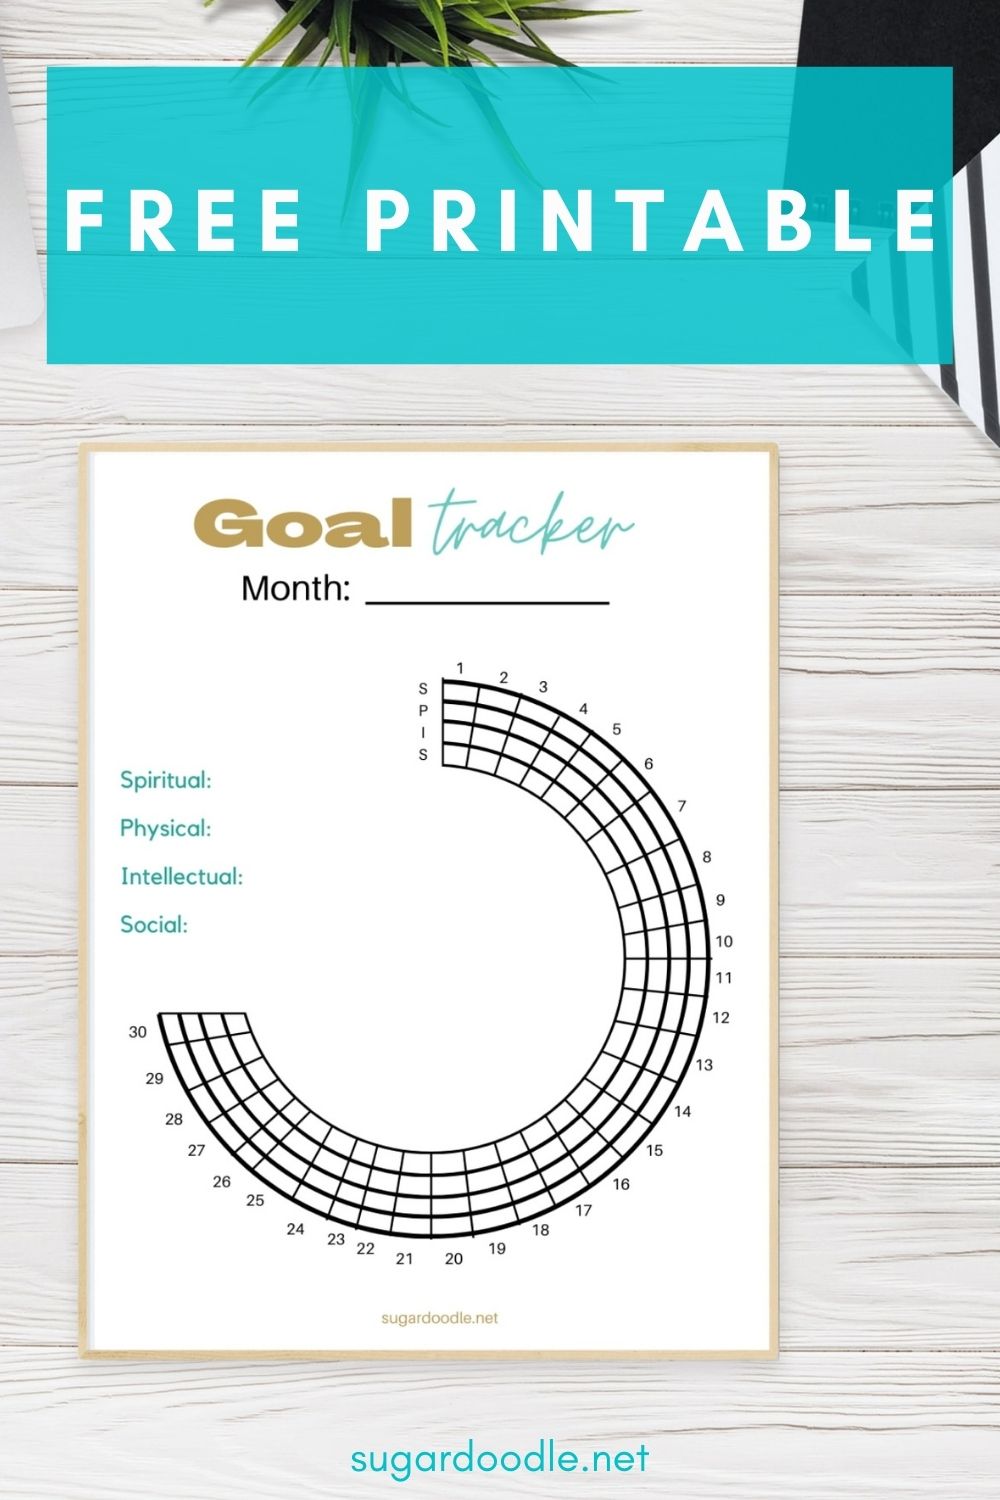 Celebrate setting goals as a family with this free tracker. #lighttheworld